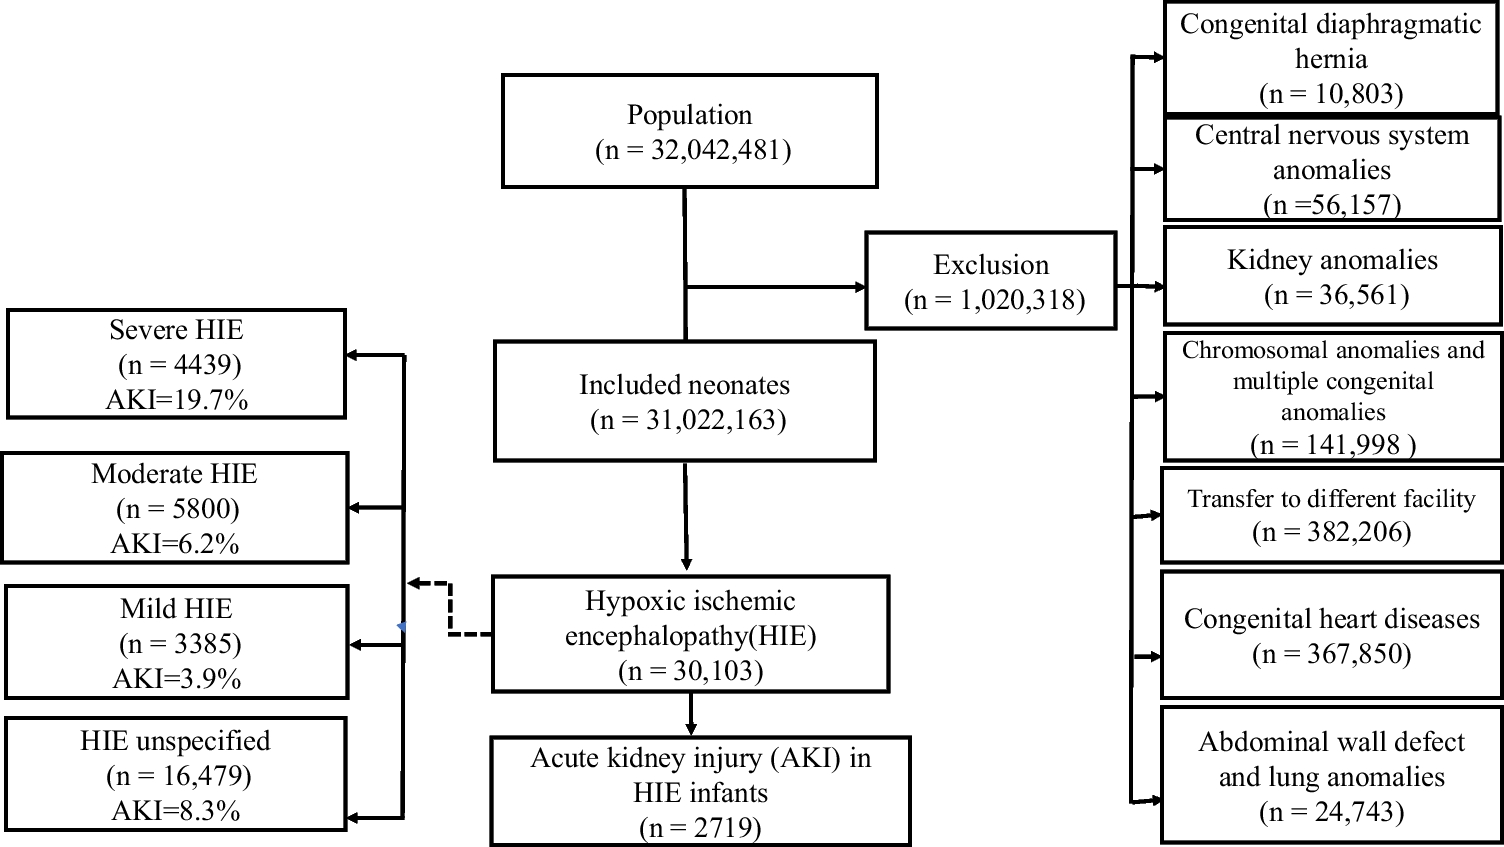 Acute kidney injury in infants with hypoxic-ischemic encephalopathy